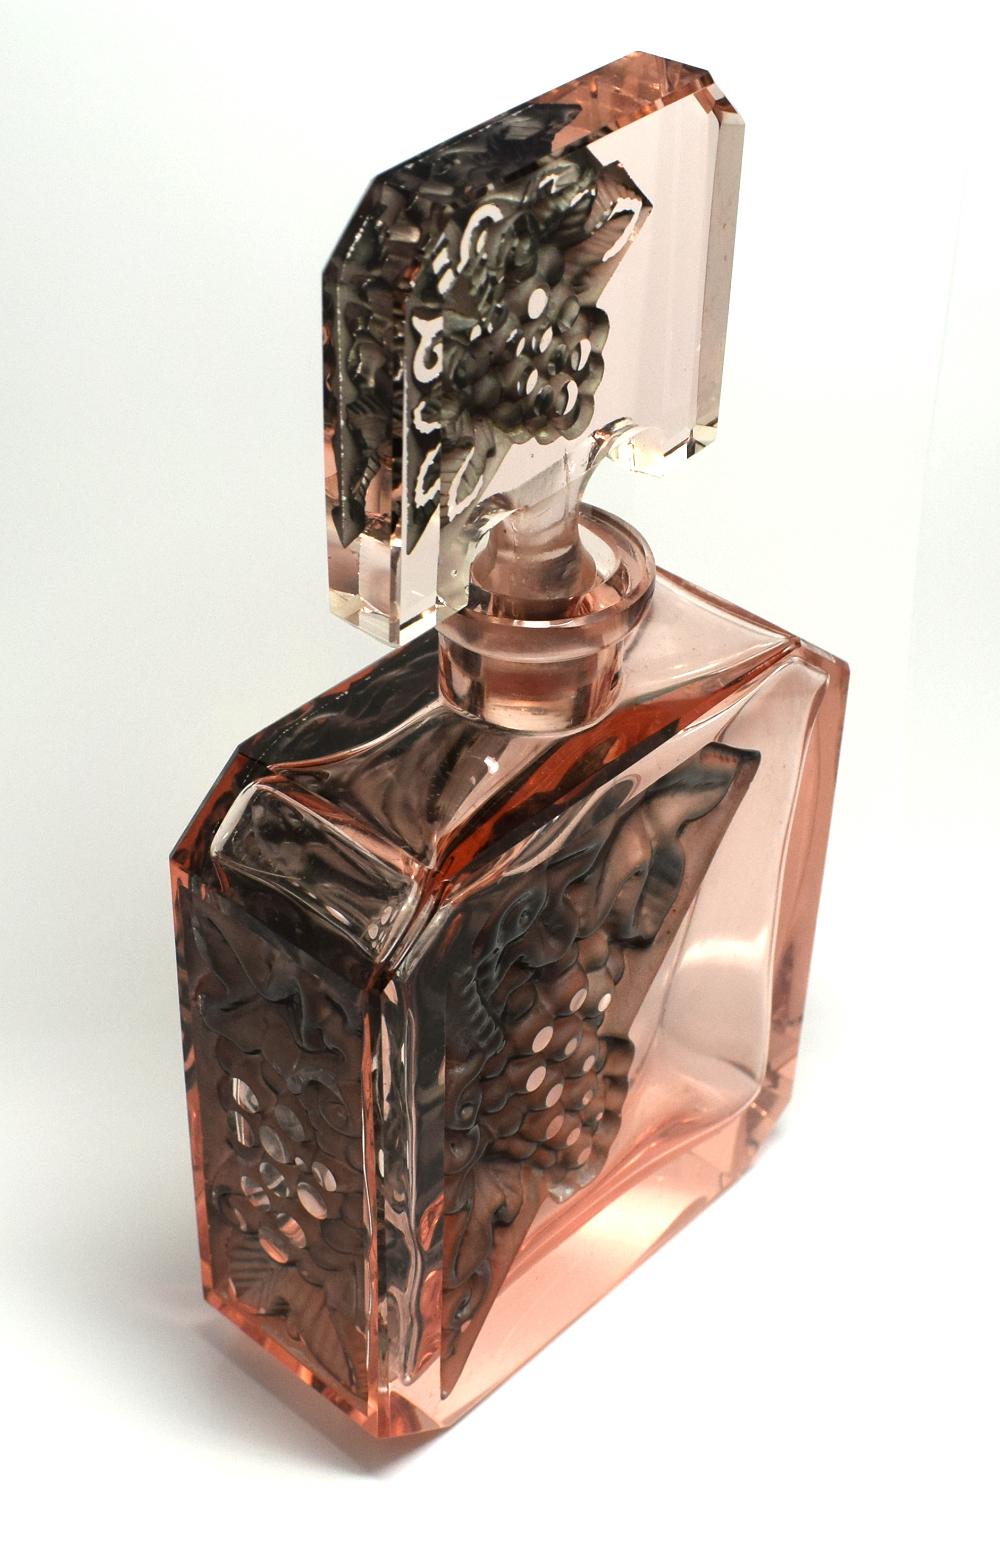 For your consideration is this fabulous Art Deco decanter set with 6 matching glasses is intricately detailed facet-cut glass with acid mat relief panels in a pale rose pink glass, manufactured by Curt Schlevogt, who established his own glass